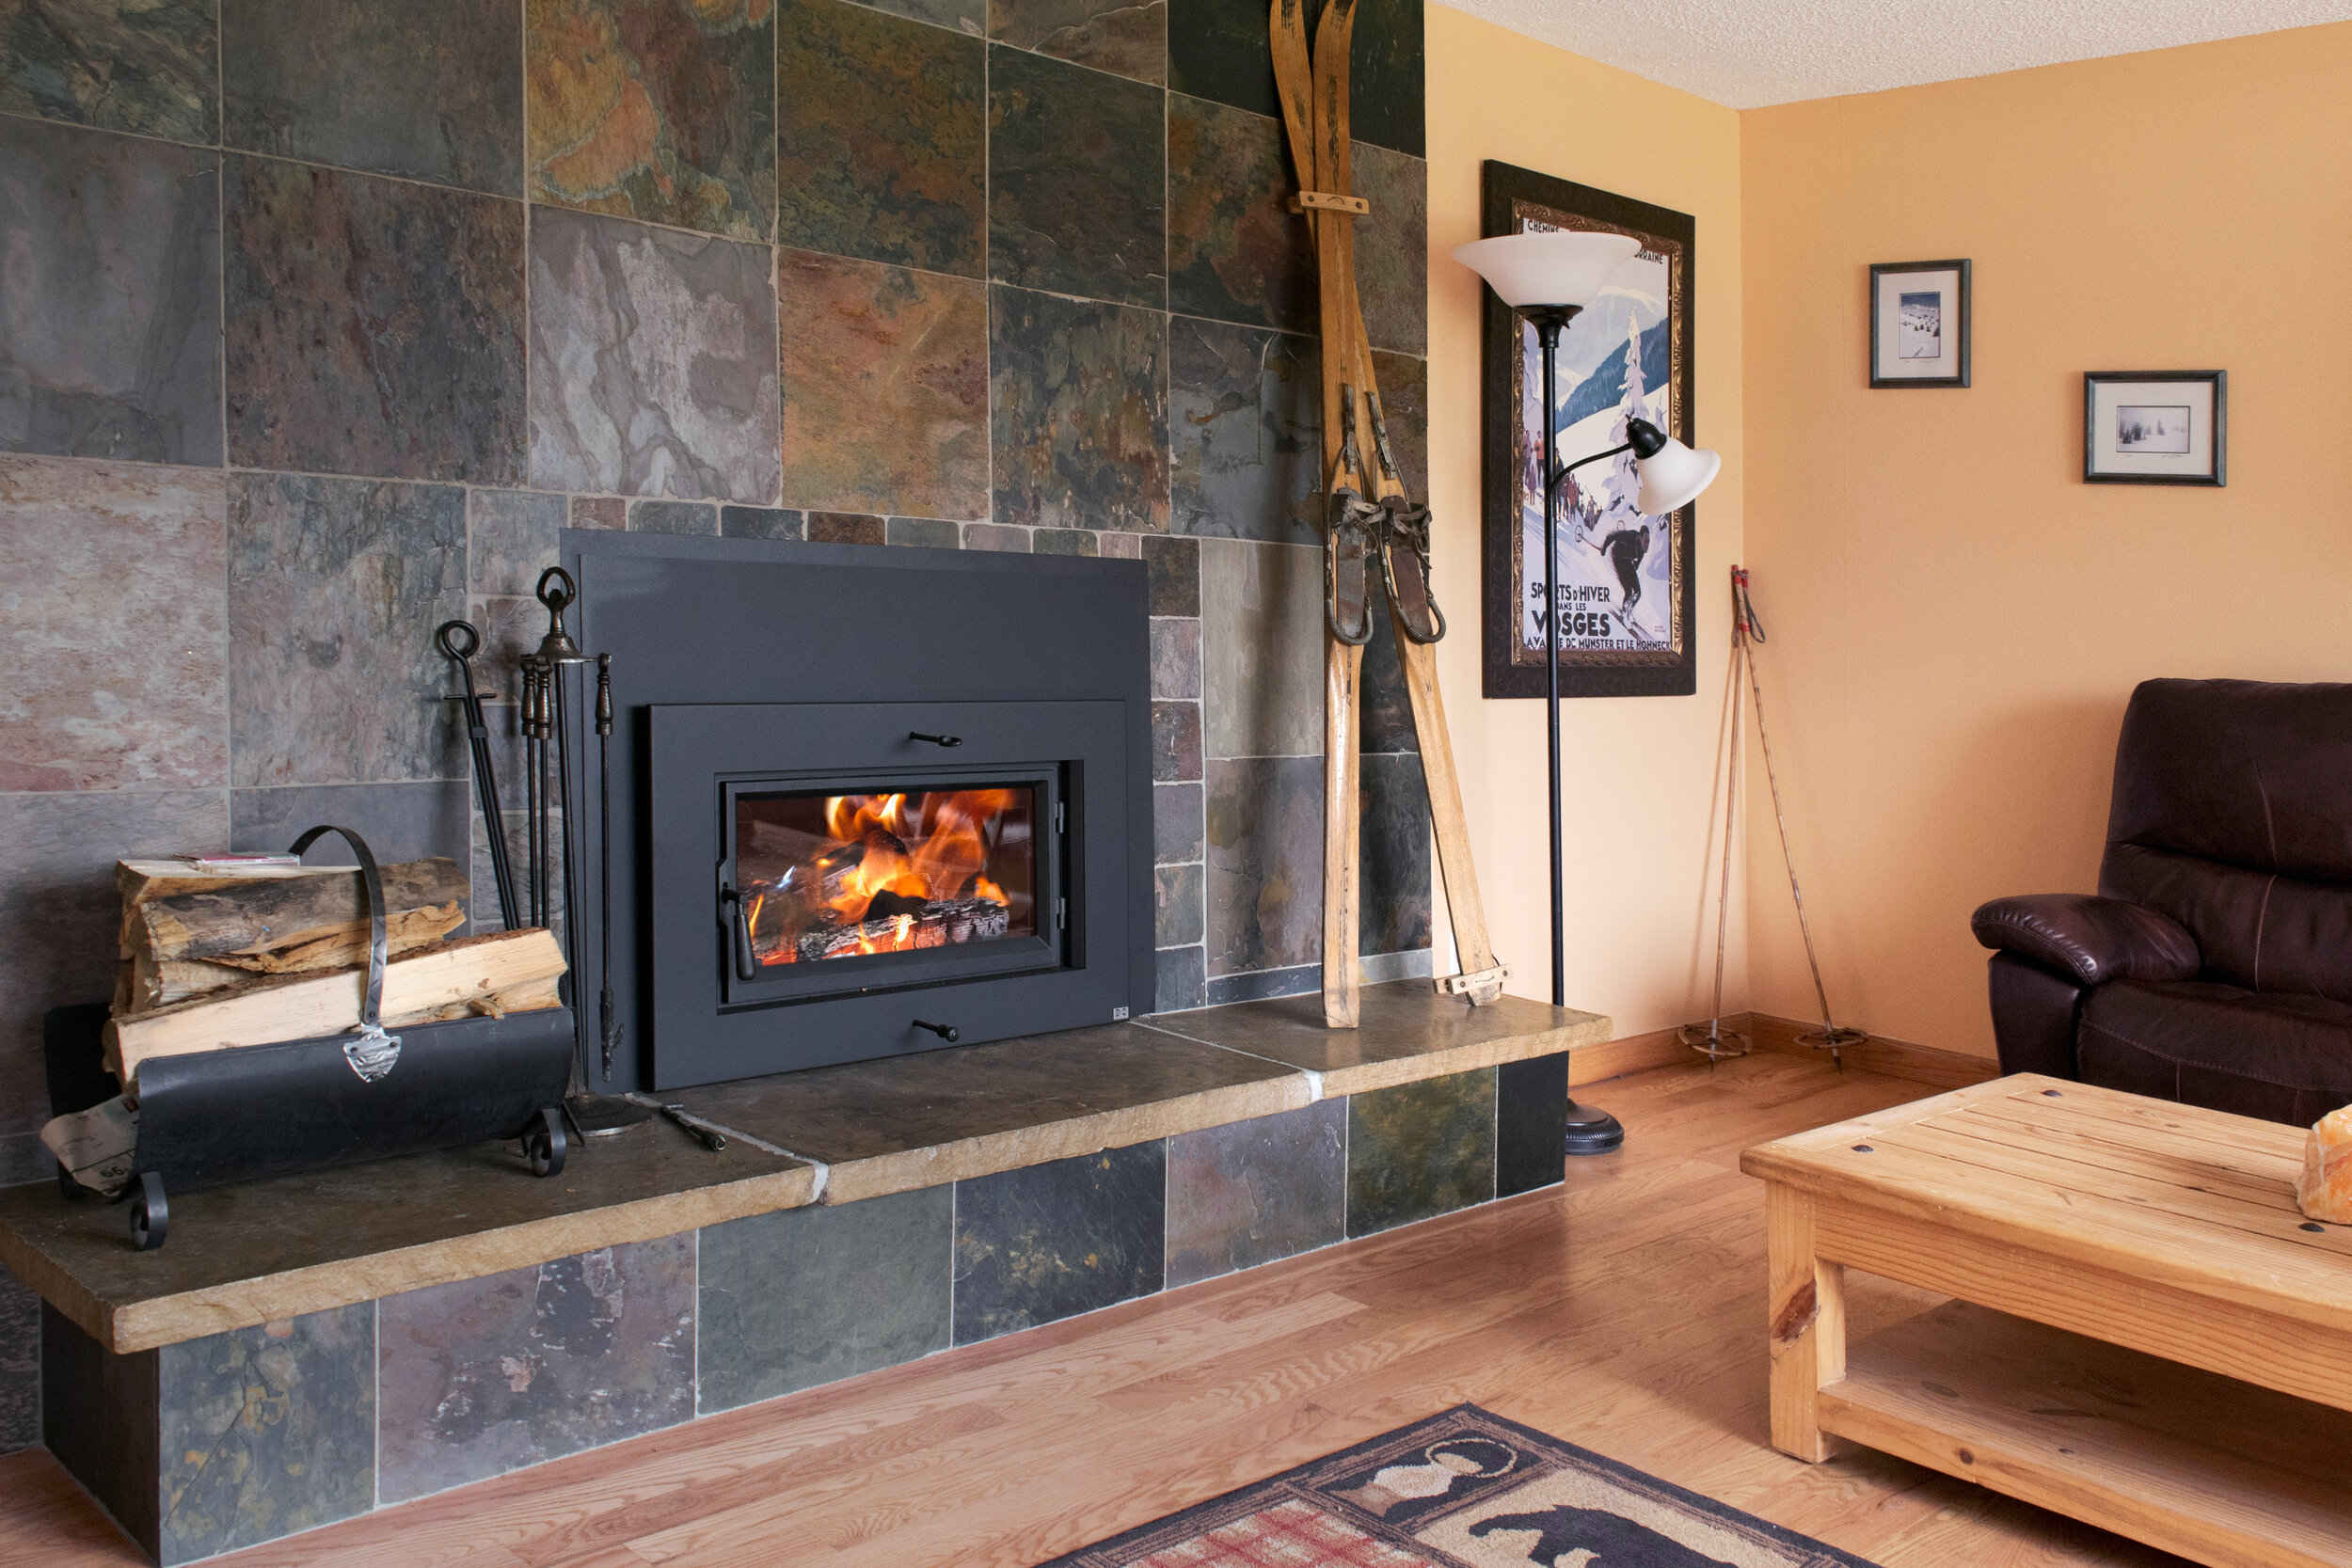 The Dangers of Wet Firewood  Mountain Home Stove & Fireplace